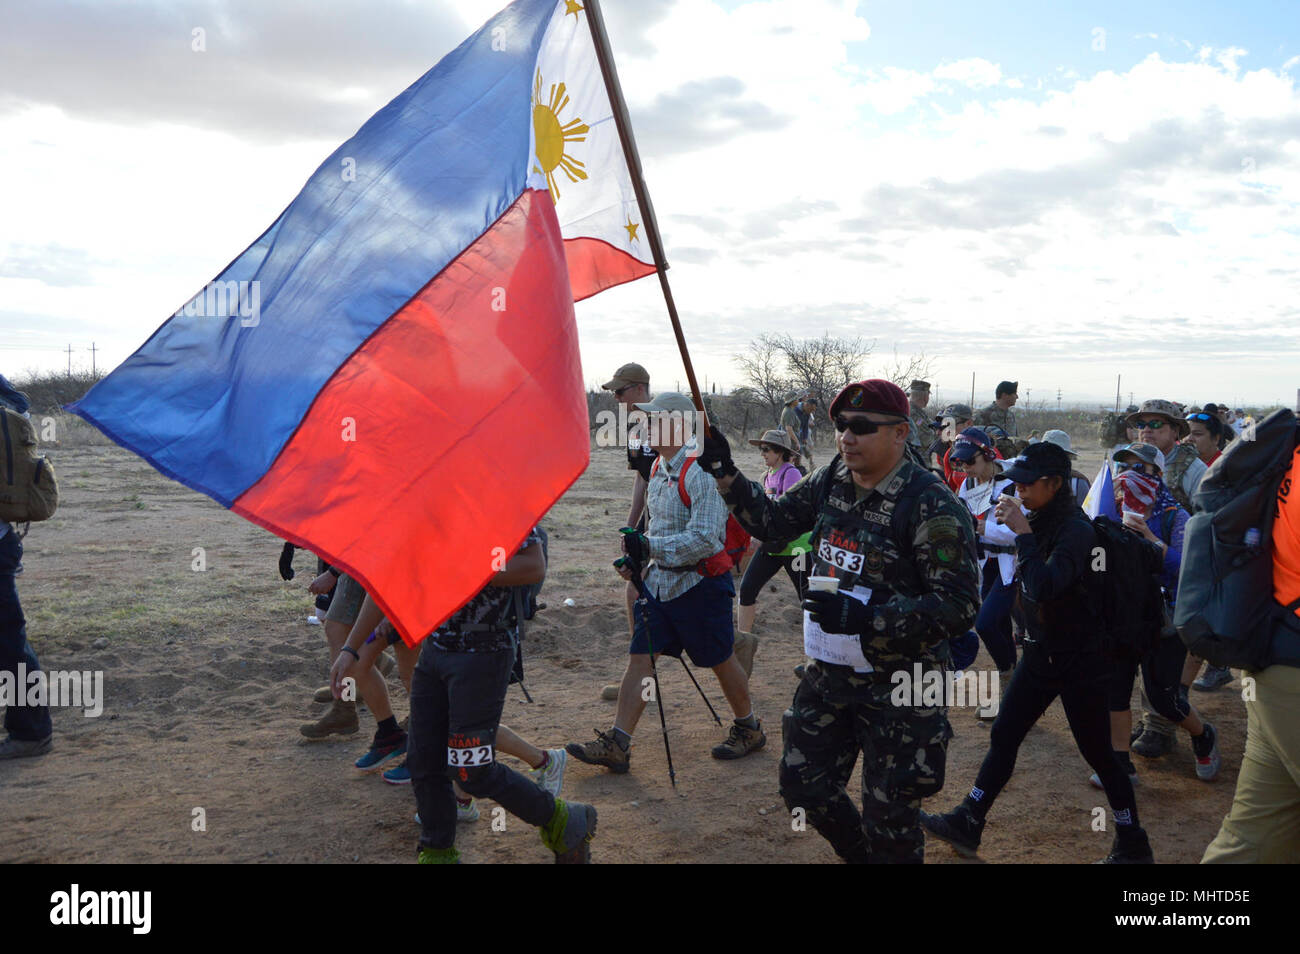 A Philippine Army Soldier proudly carries his nation’s flag during Bataan Memorial Death March at White Sands Missile Range, New Mexico, March 25, 2018. Several foreign allied countries to include Germany and Poland sent service members to participate in the event. The Bataan Memorial Death March honors the U.S. service members and Filipino soldiers that were forced marched 65 miles by the Japanese Army through the Philippine jungle in April of 1942. (U.S. Army Reserve Stock Photo